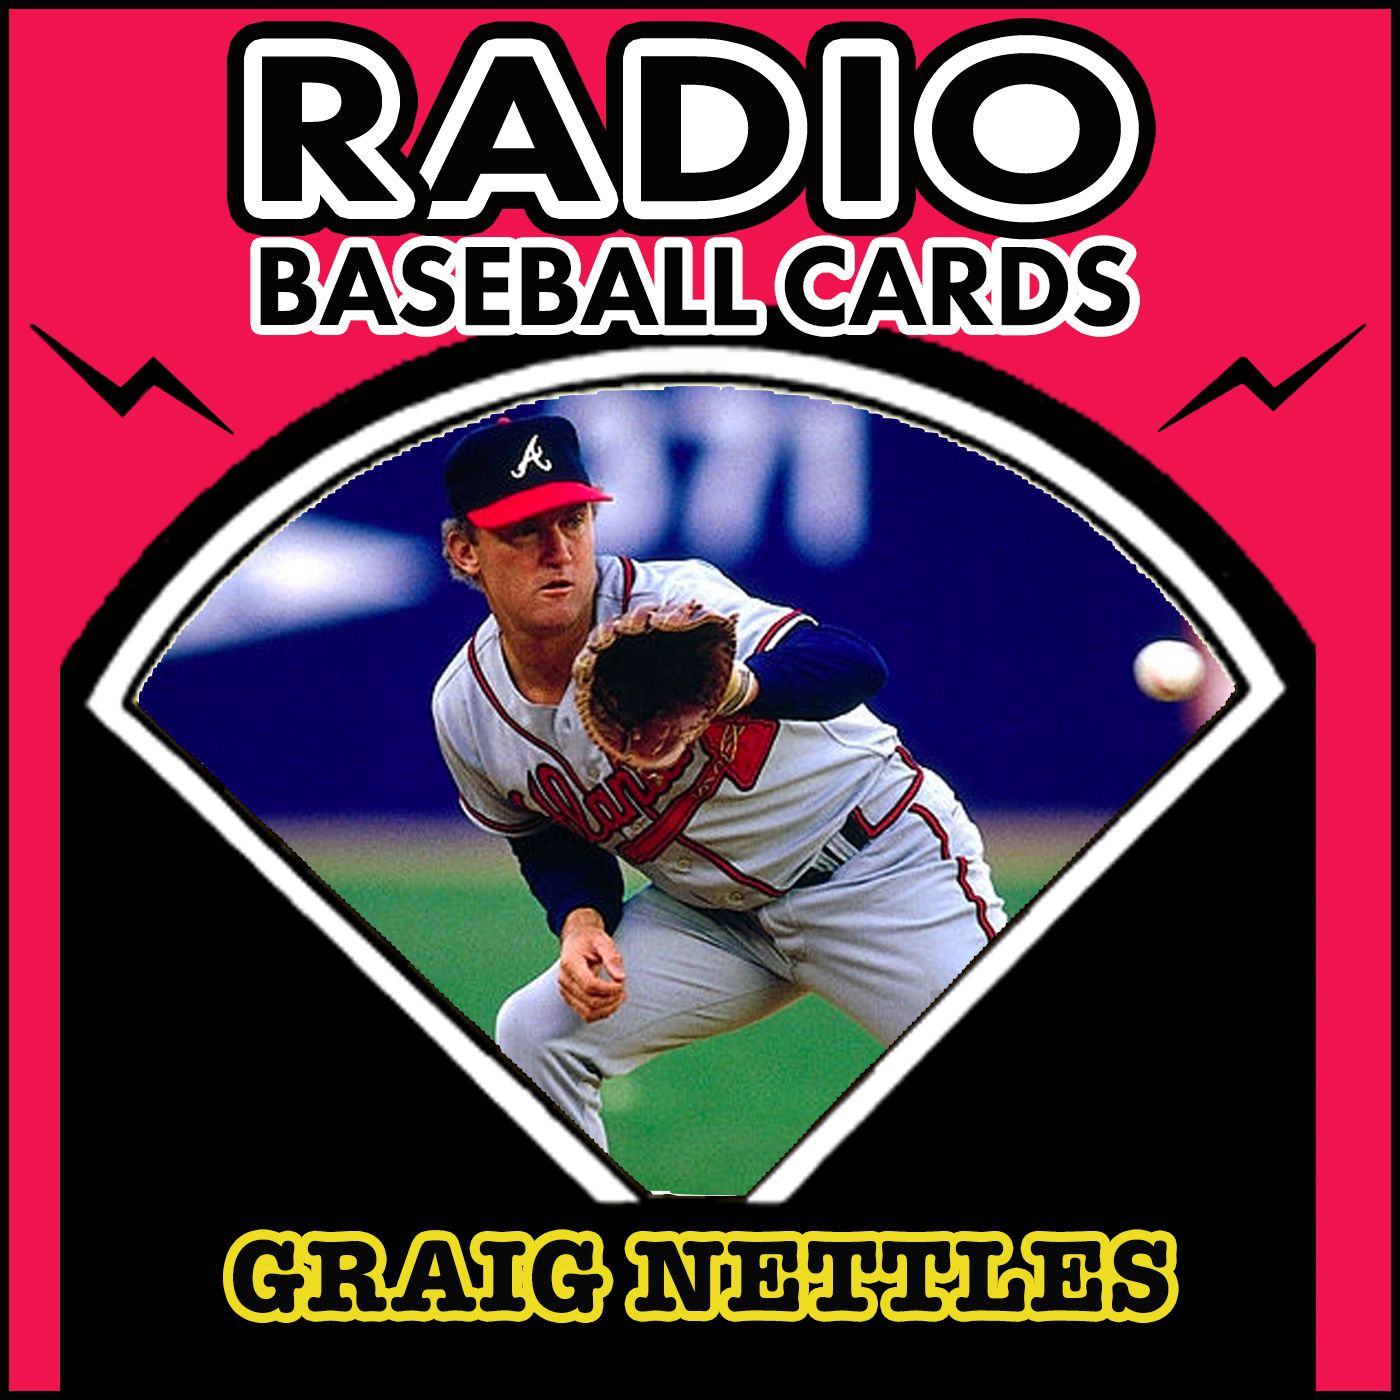 6 of Graig Nettles Podcasts Interviews